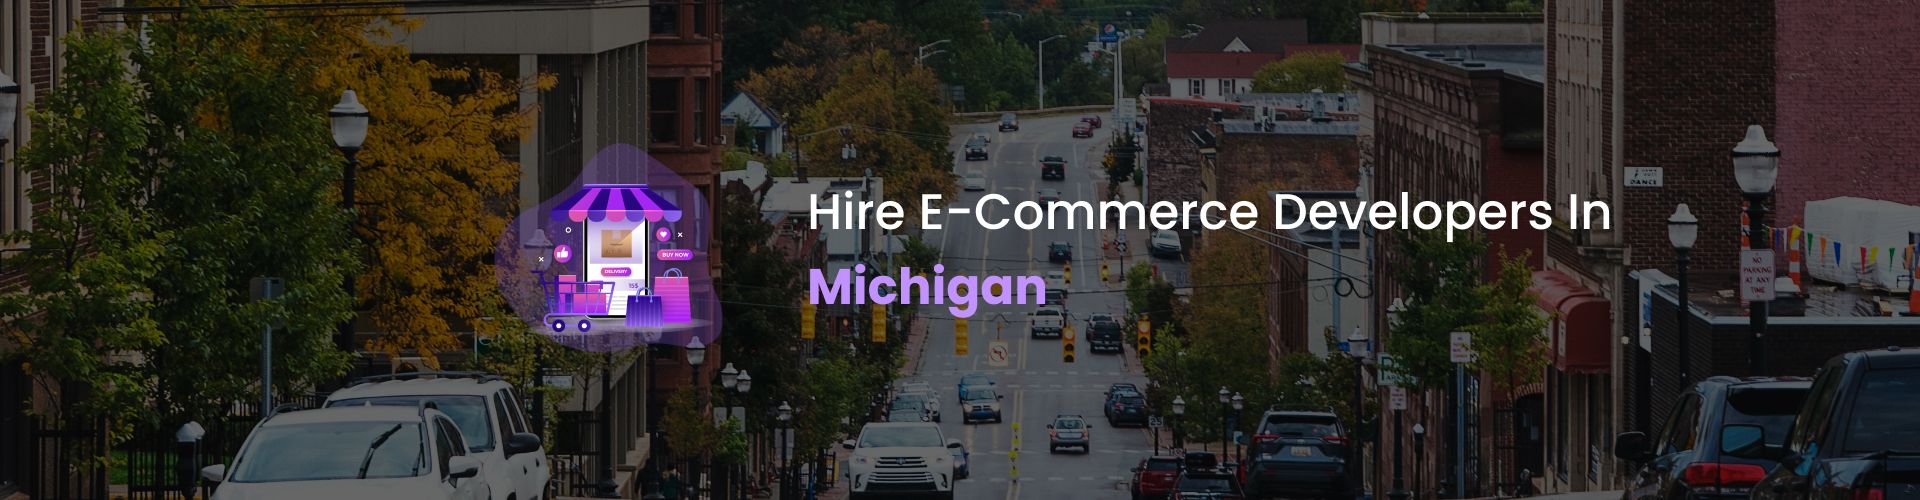 hire ecommerce developers in michigan